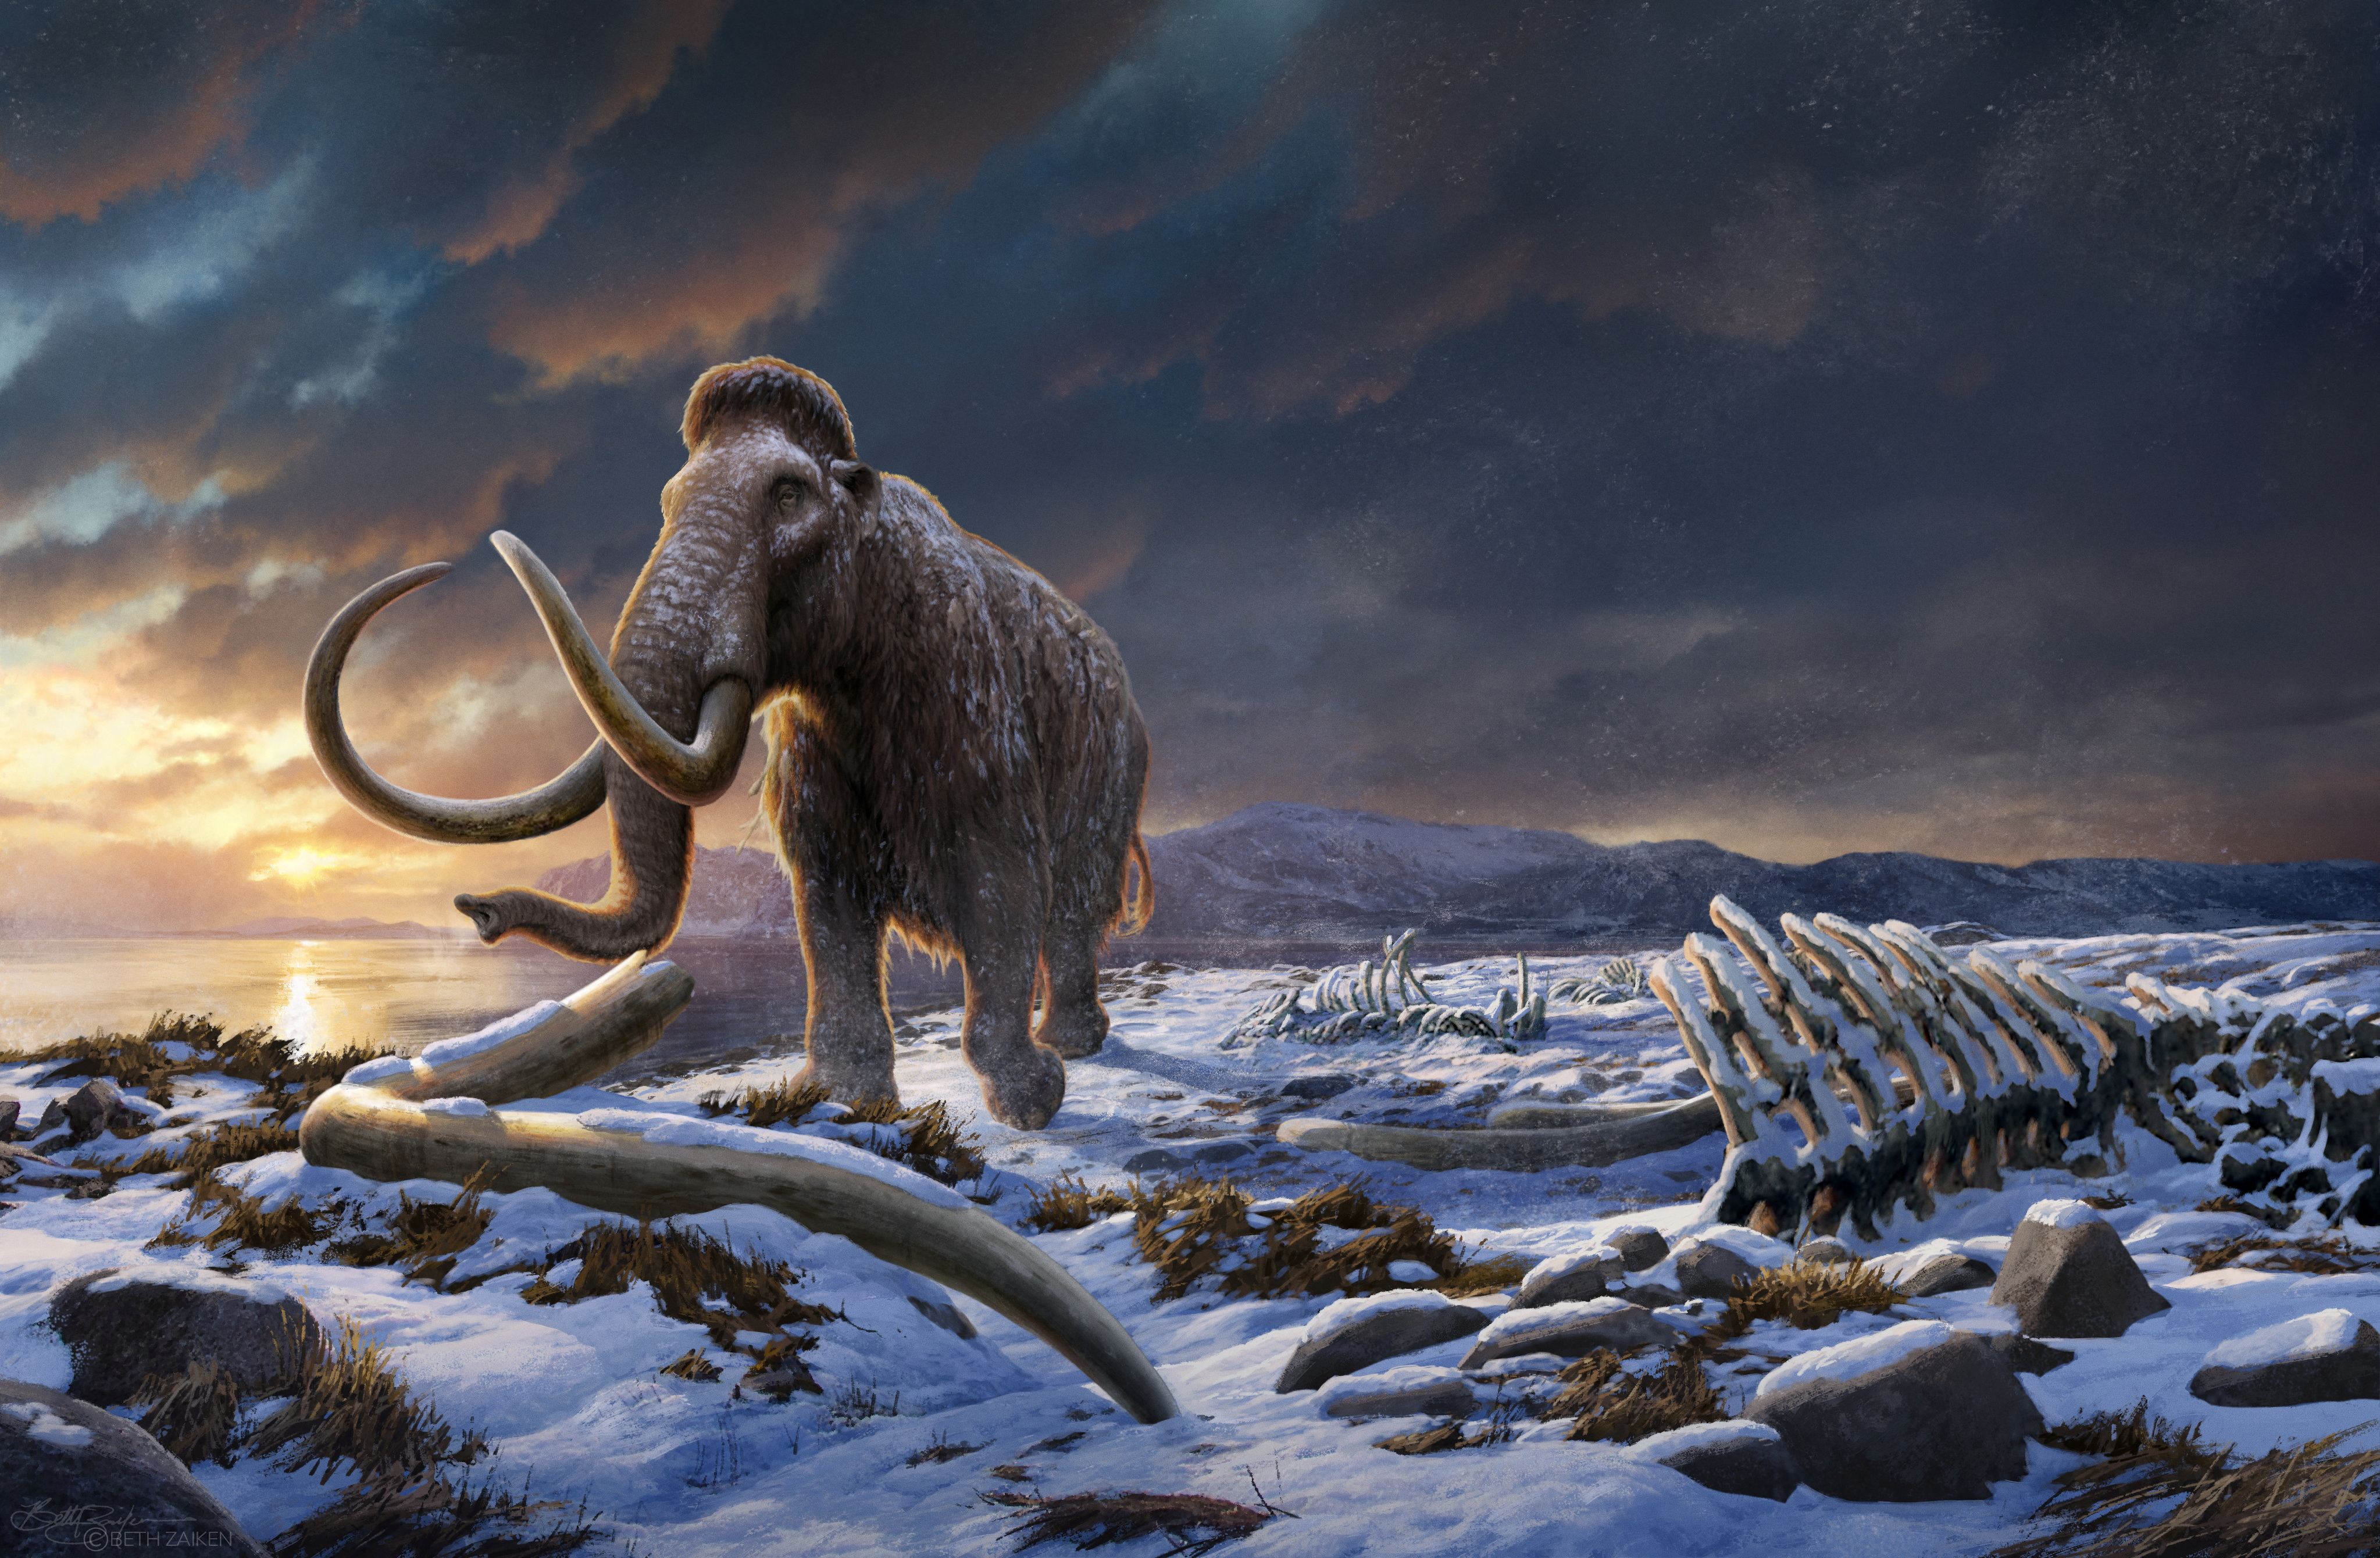 New genome study deepens mystery of what doomed Earth's last mammoths 